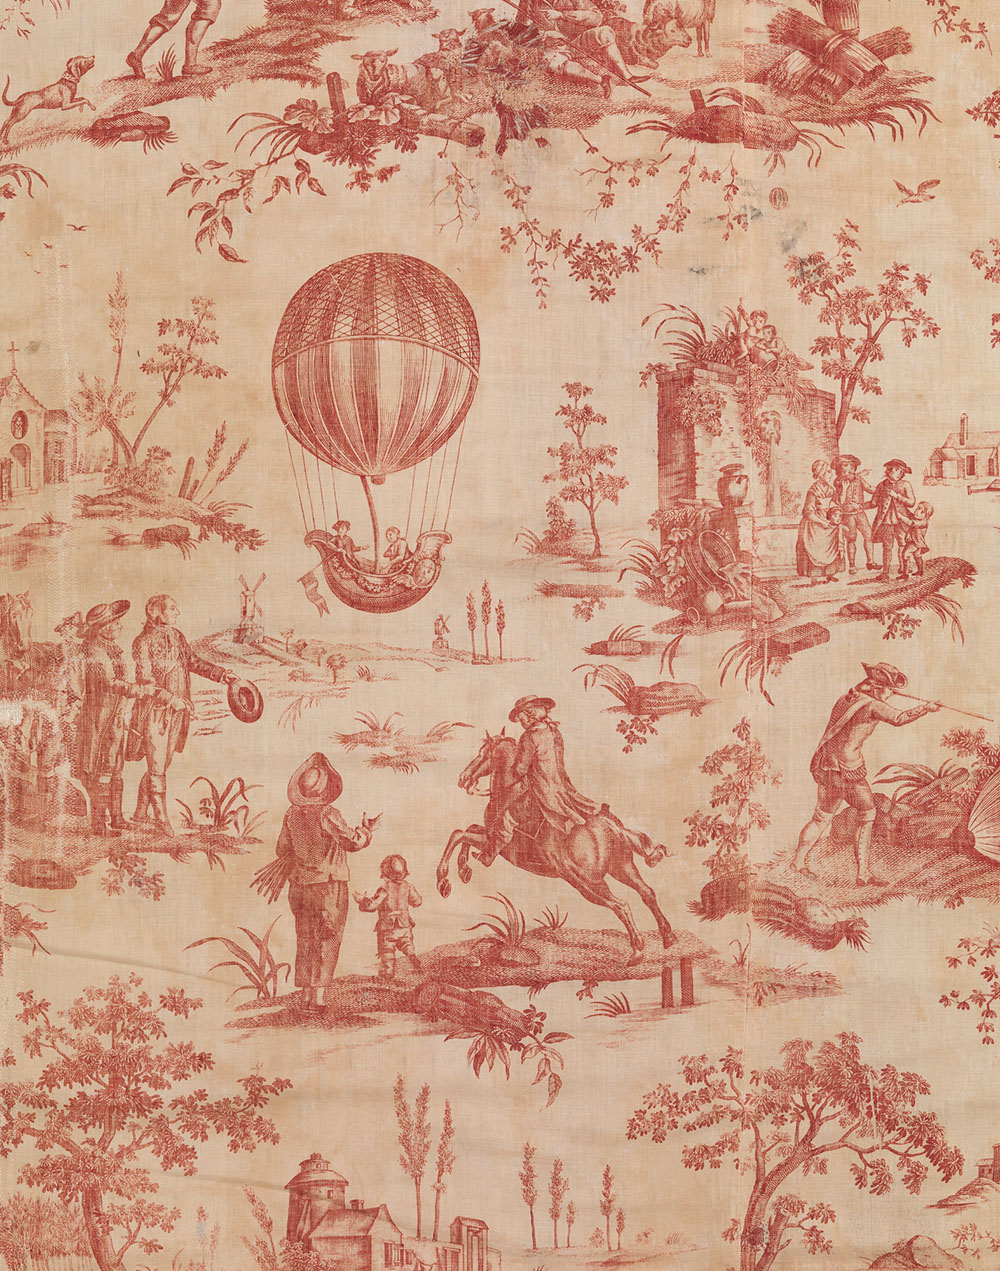 18th century toile du Jouy from the Oberkampf Manufactory